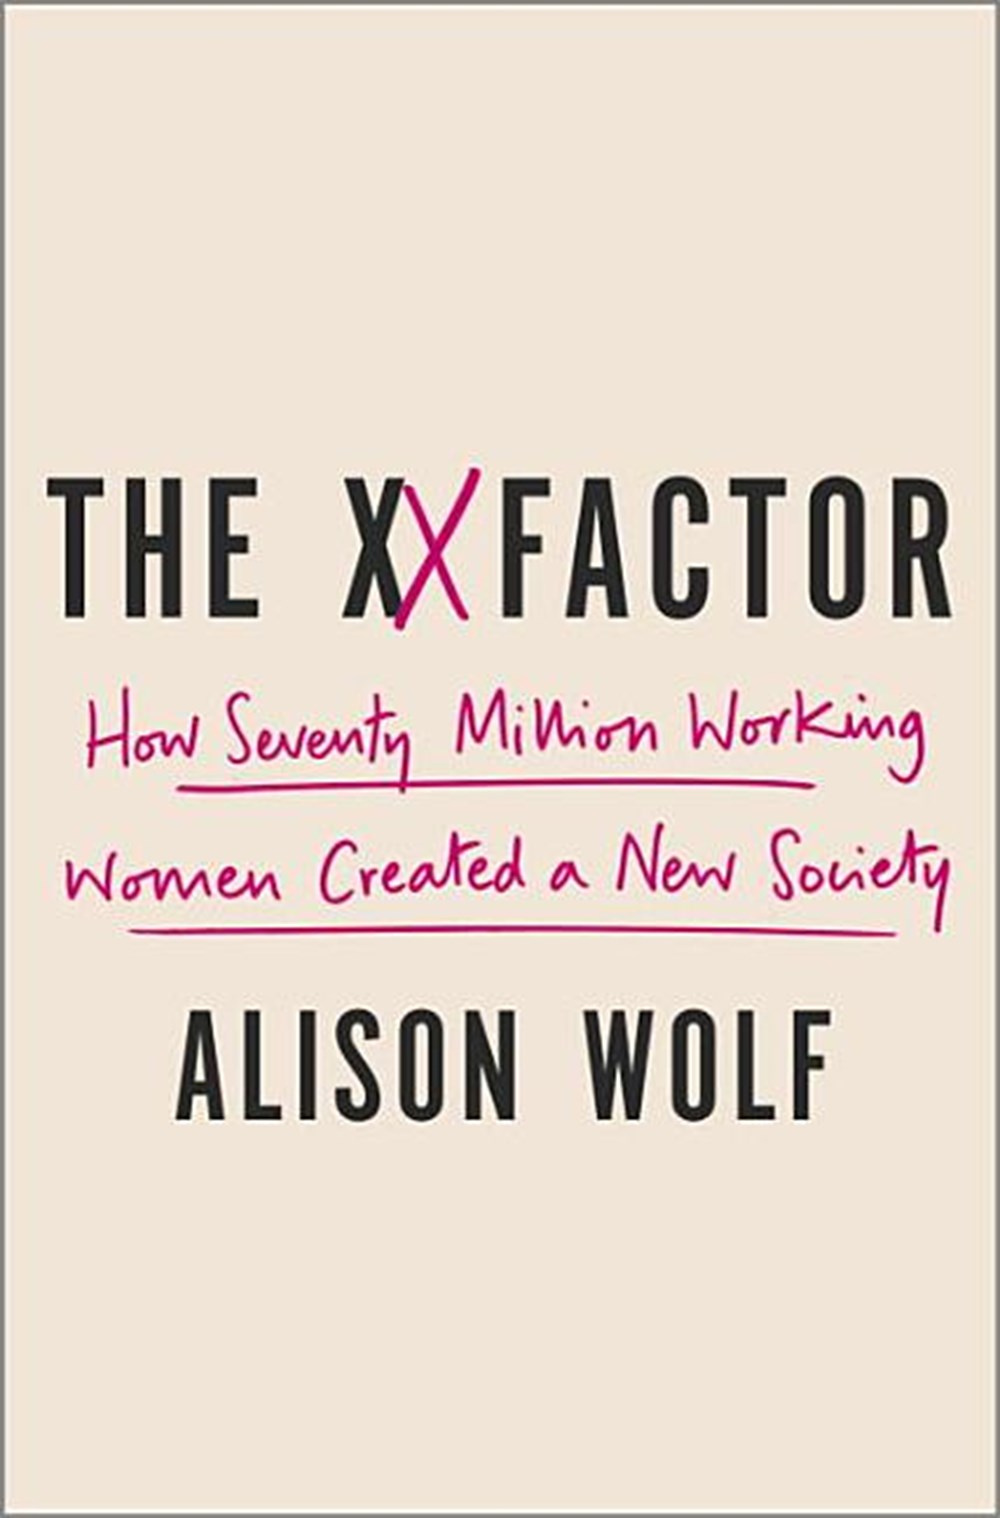 XX Factor: How the Rise of Working Women Has Created a Far Less Equal World